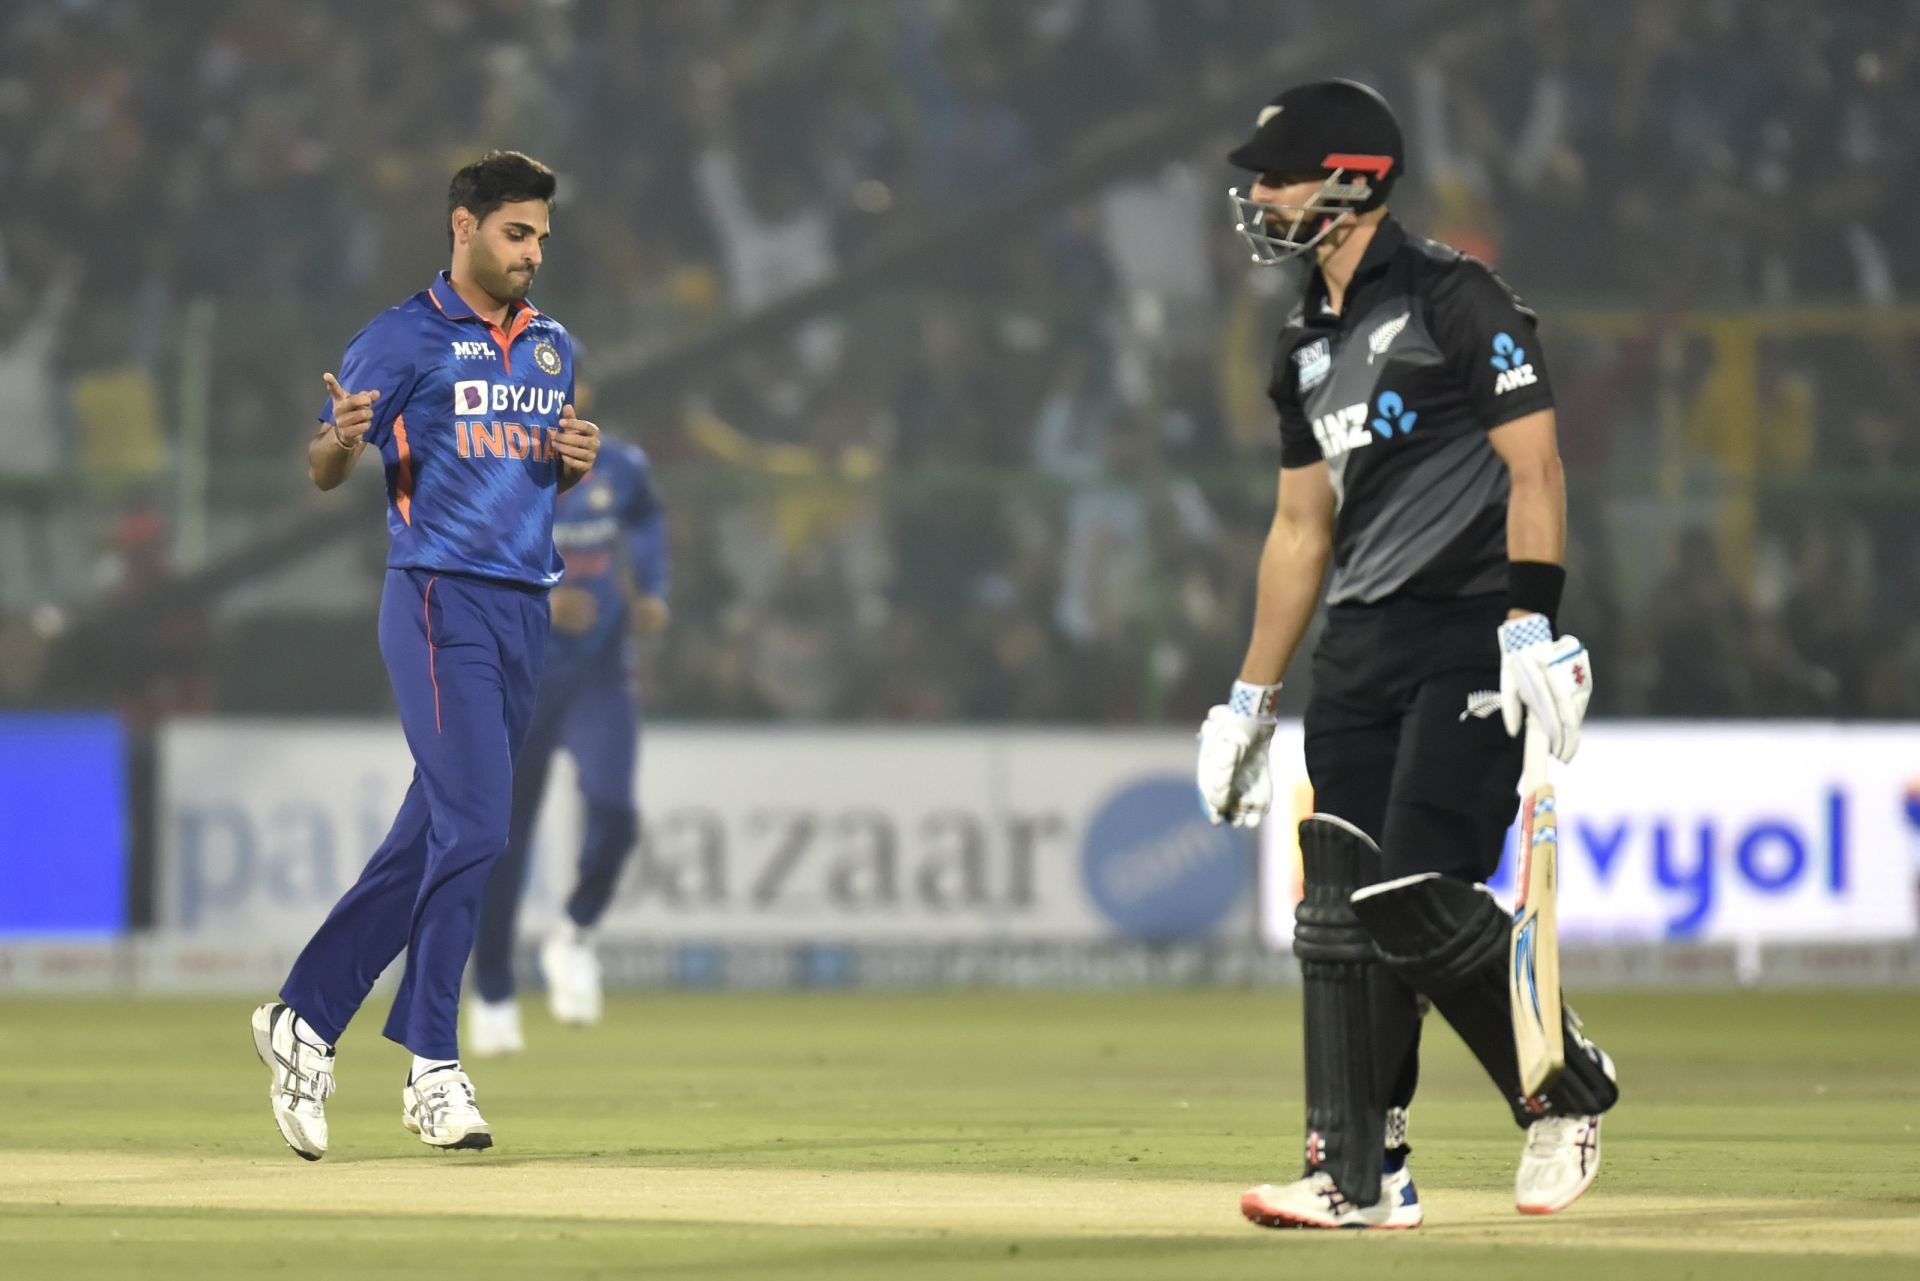 Bhuvneshwar (L) has not been in great form lately